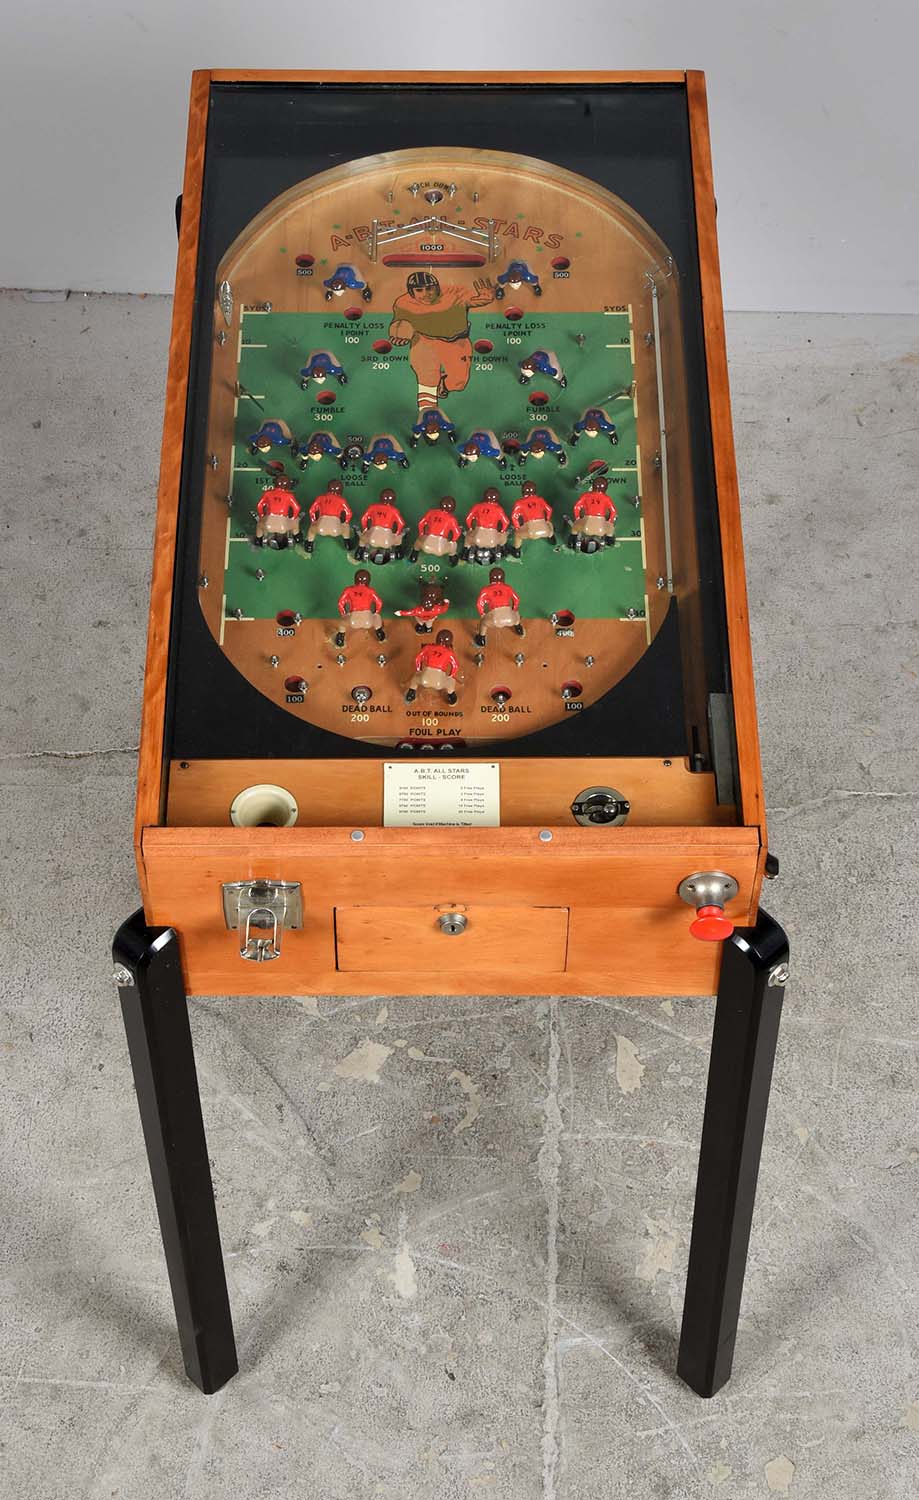 5¢ A.B.T. All Stars Electro-Mechanical Pinball Machine, Estimated at $25,000-40,000.